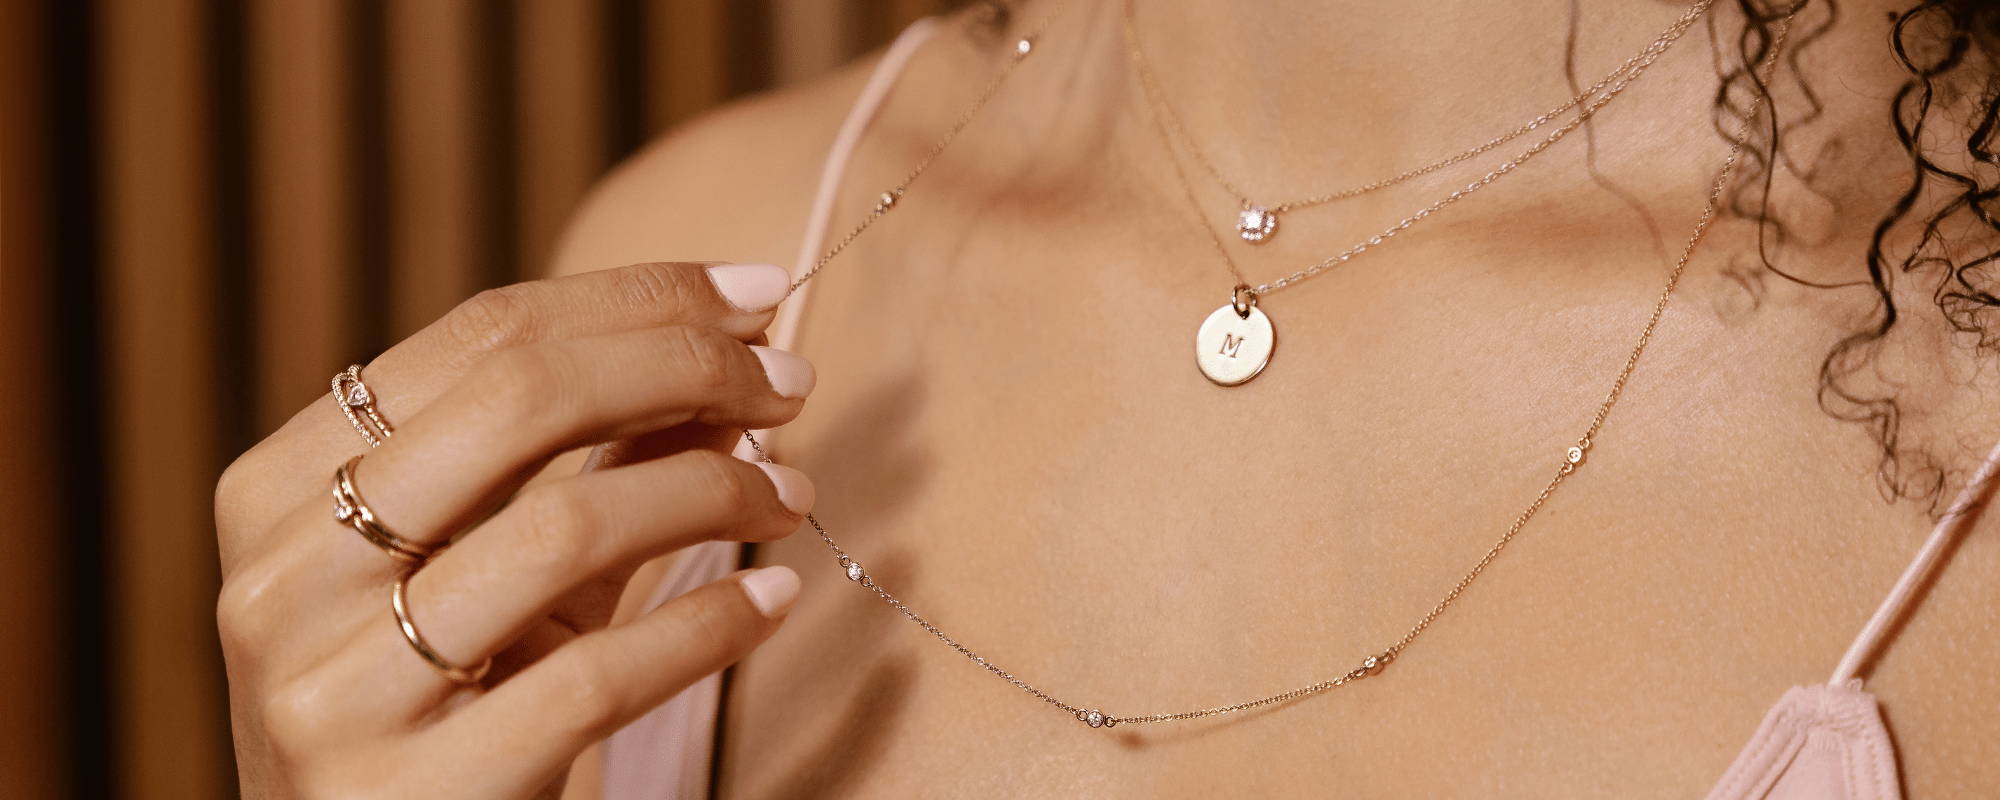 Trending: How to Stack and Layer Jewelry